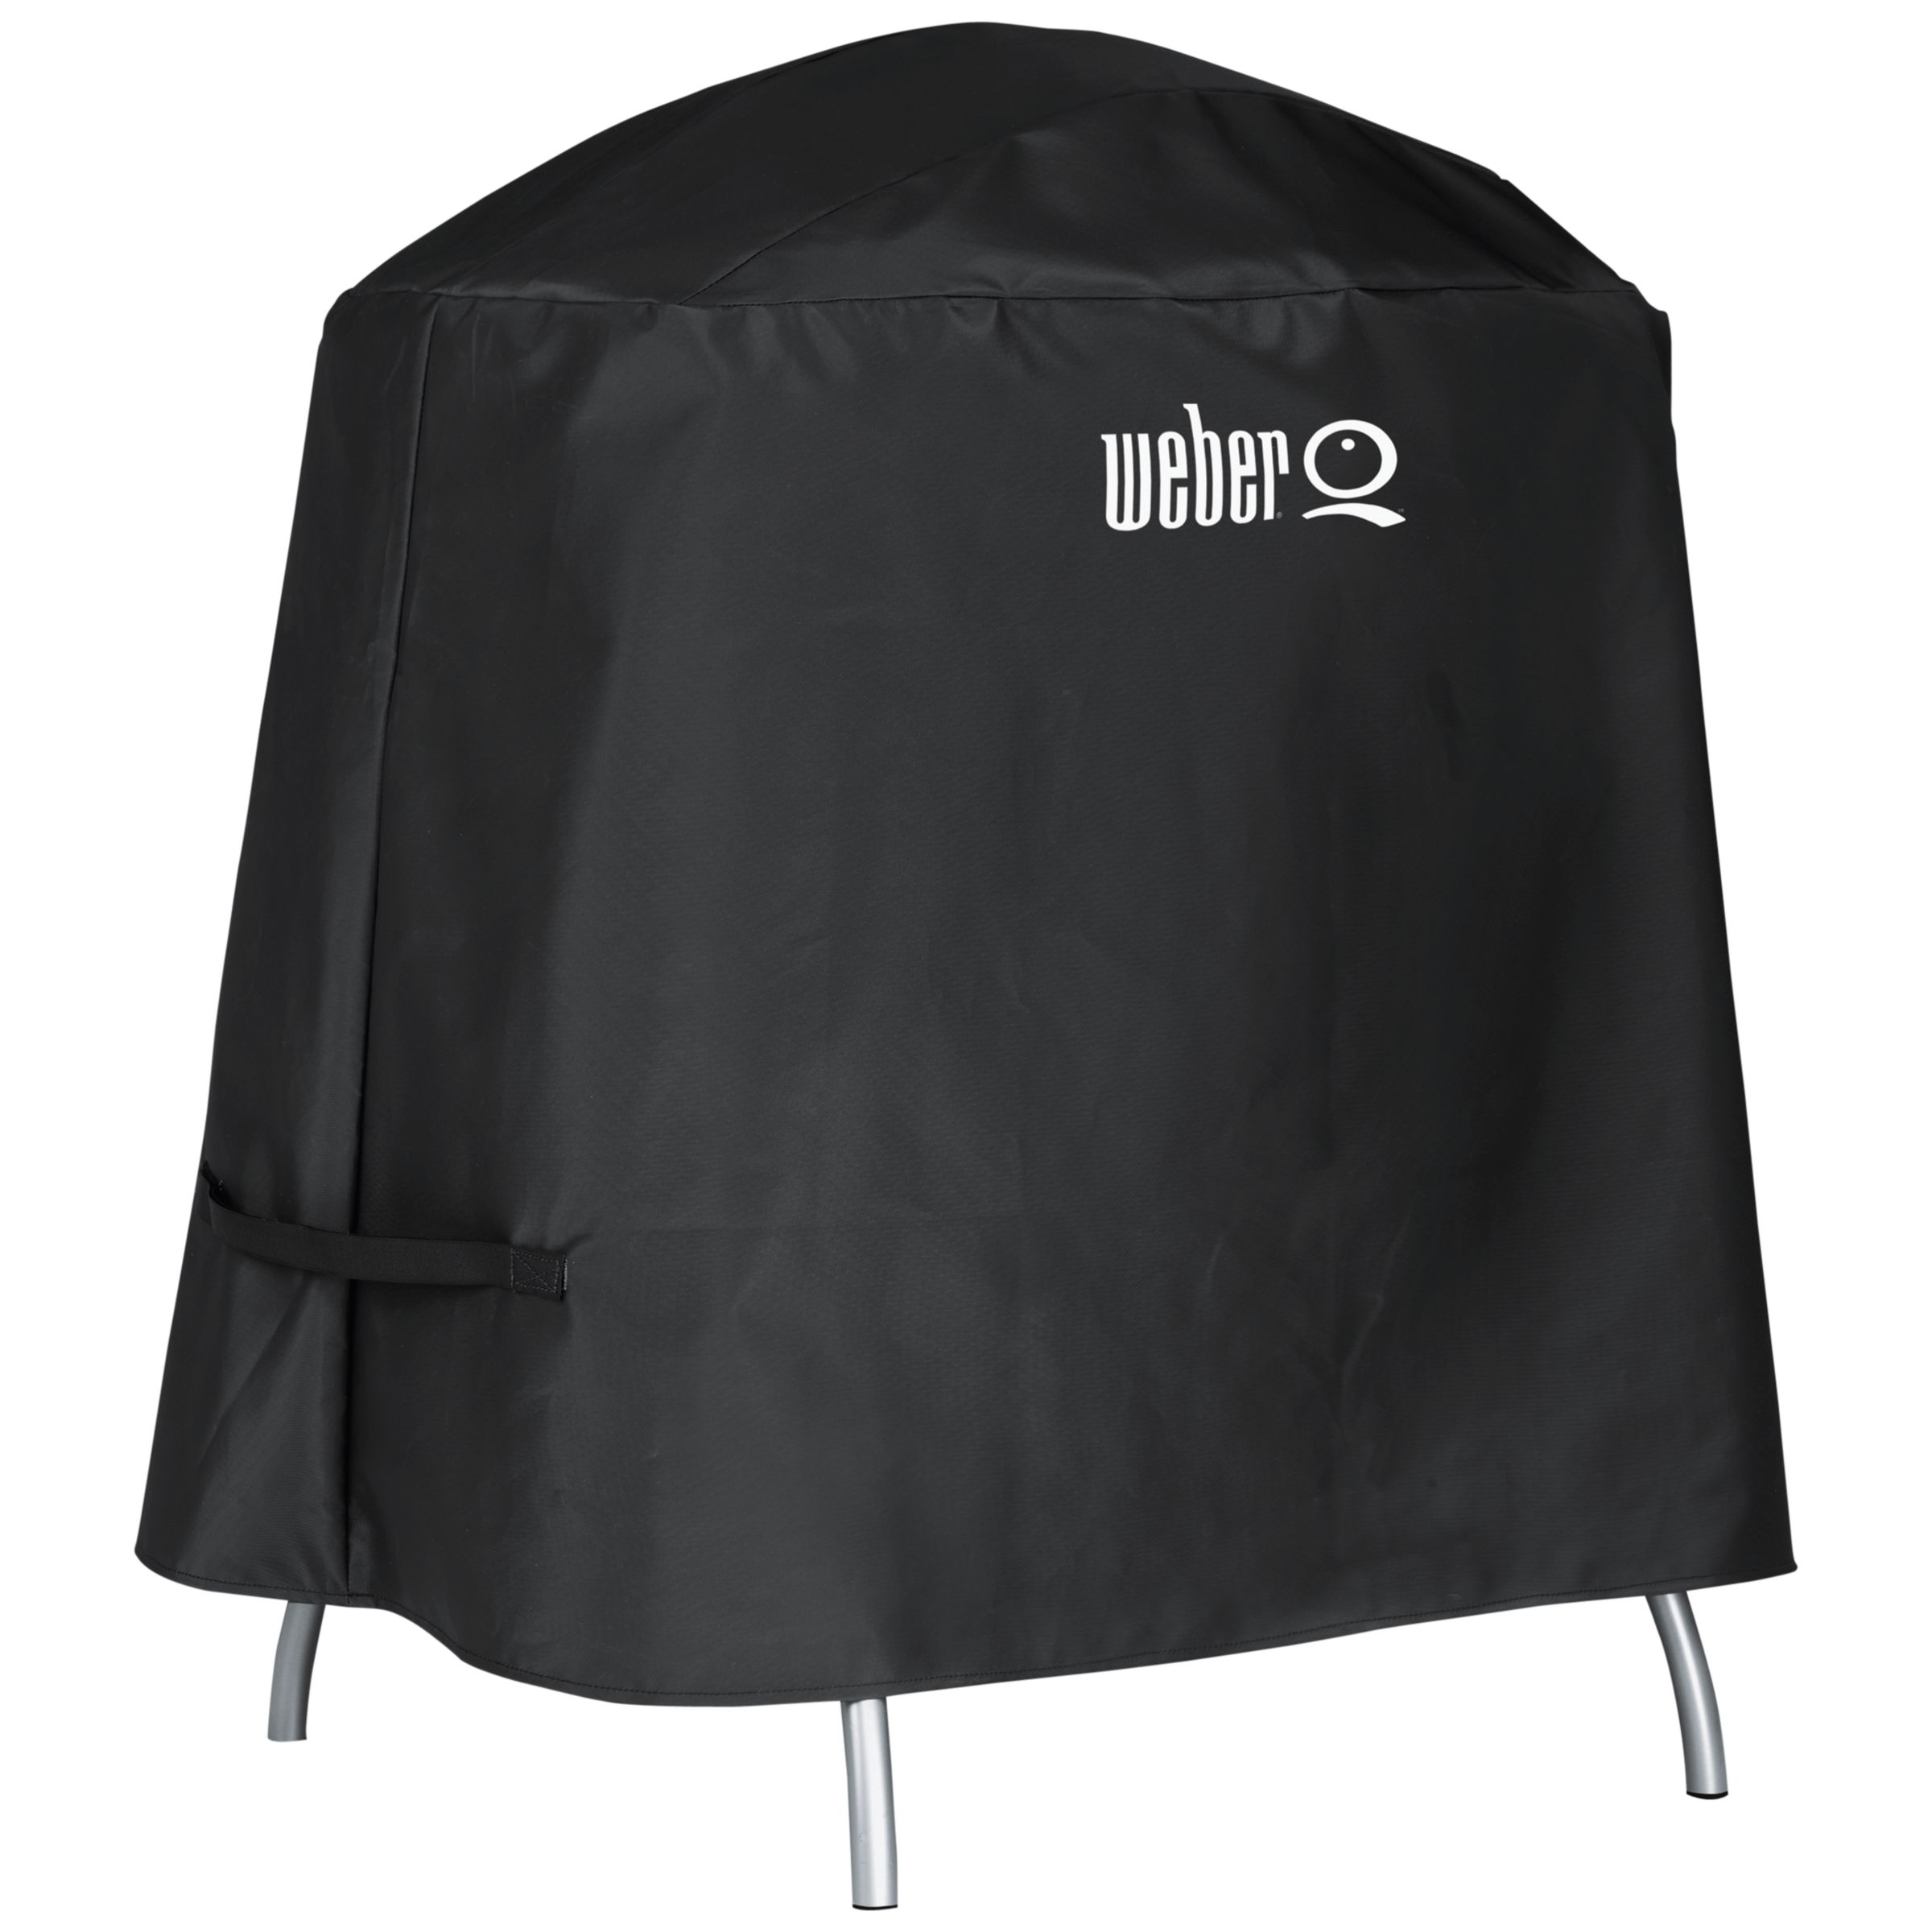 Weber Q Barbecue Cover